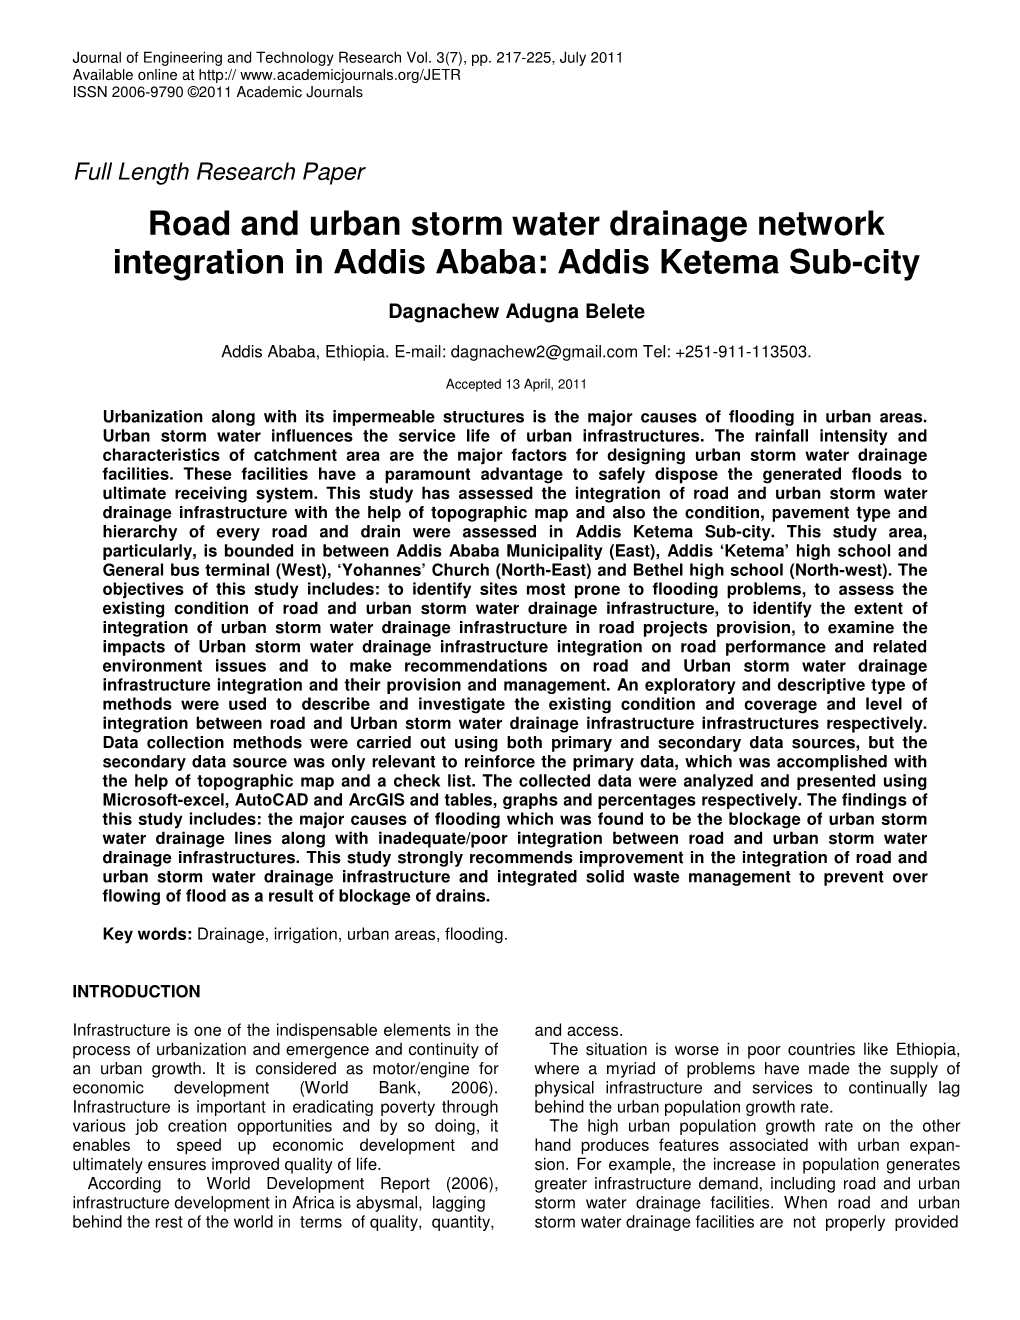 Road and Urban Storm Water Drainage Network Integration in Addis Ababa: Addis Ketema Sub-City